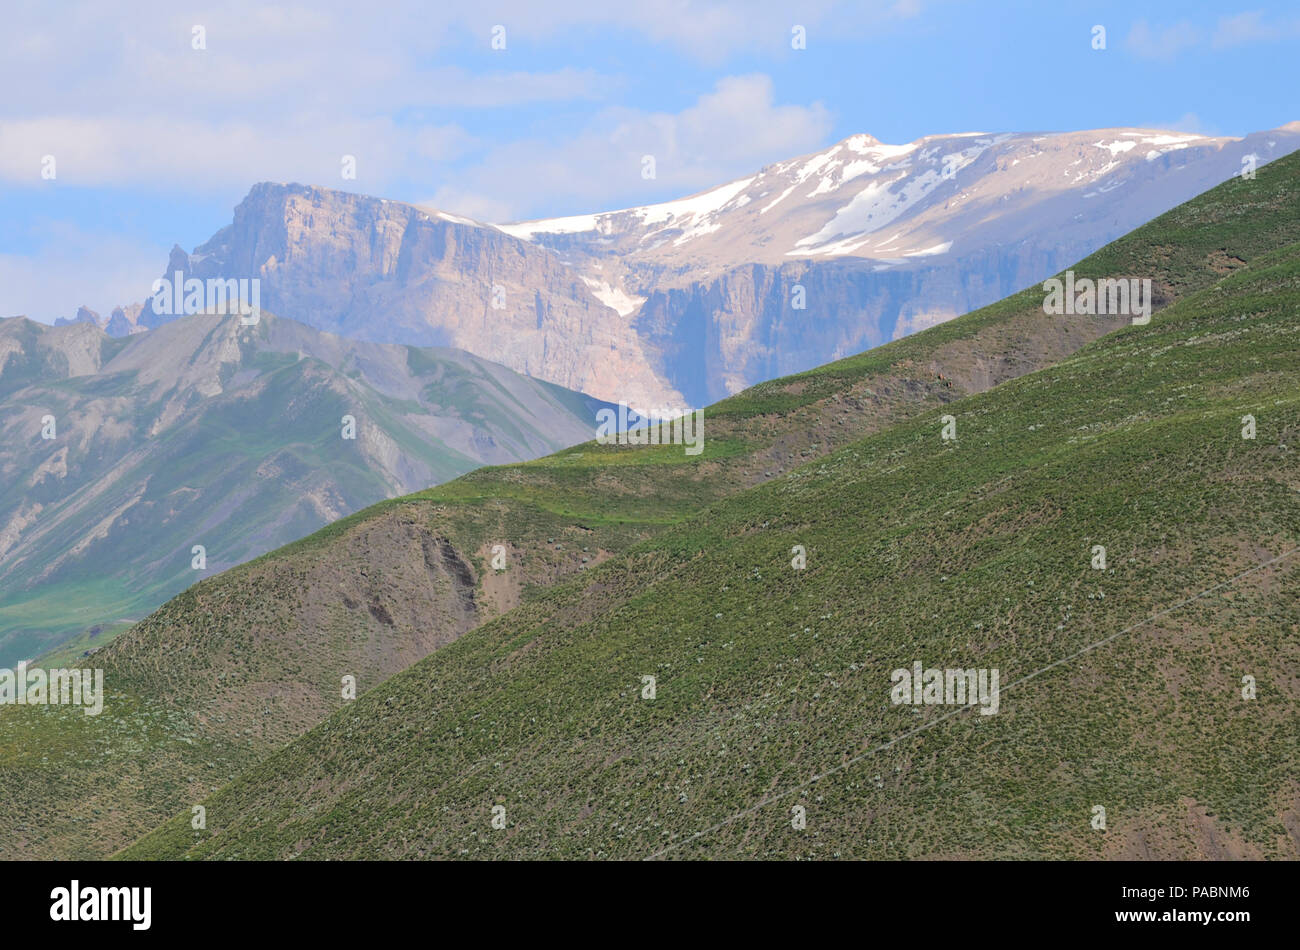 Mountains from the Greater Caucasus range in Shahdag National Park, Azerbaijan Stock Photo